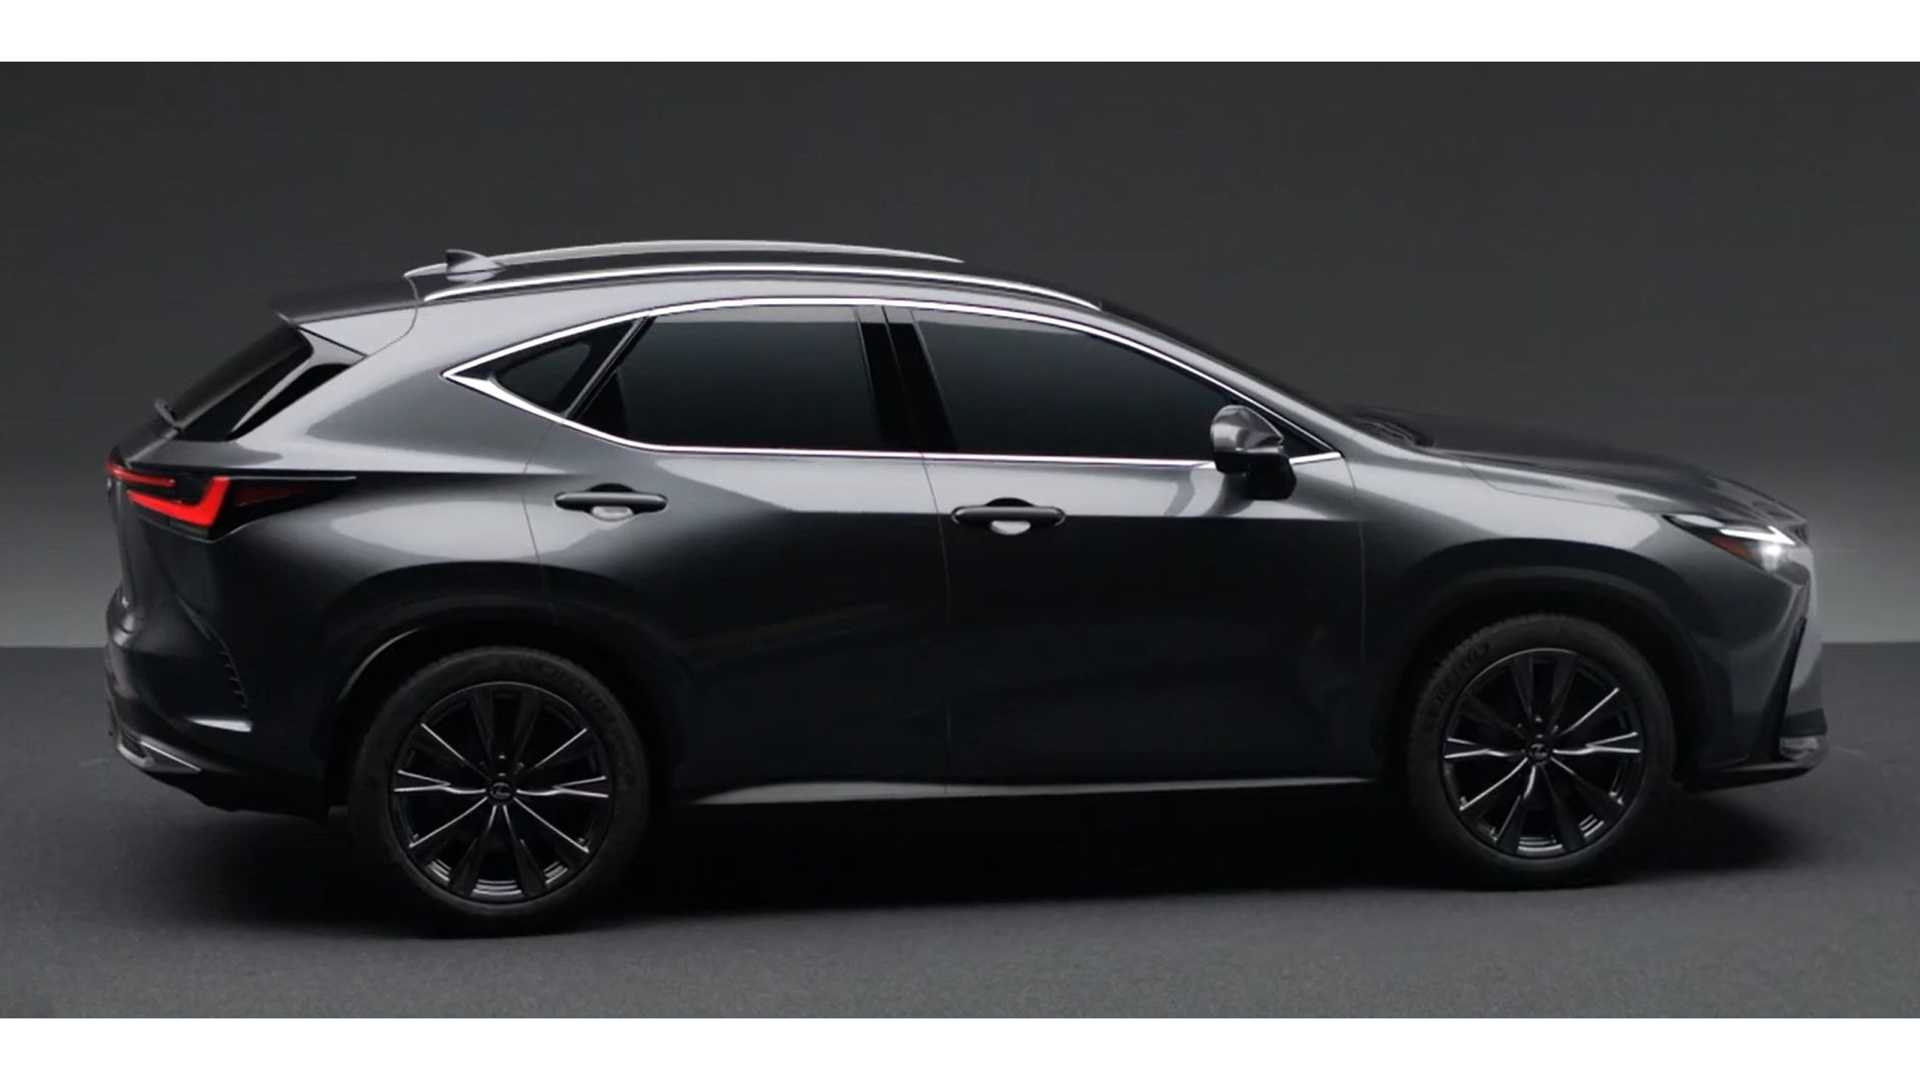 2022 Lexus NX Teaser Image Previews What We Already Know